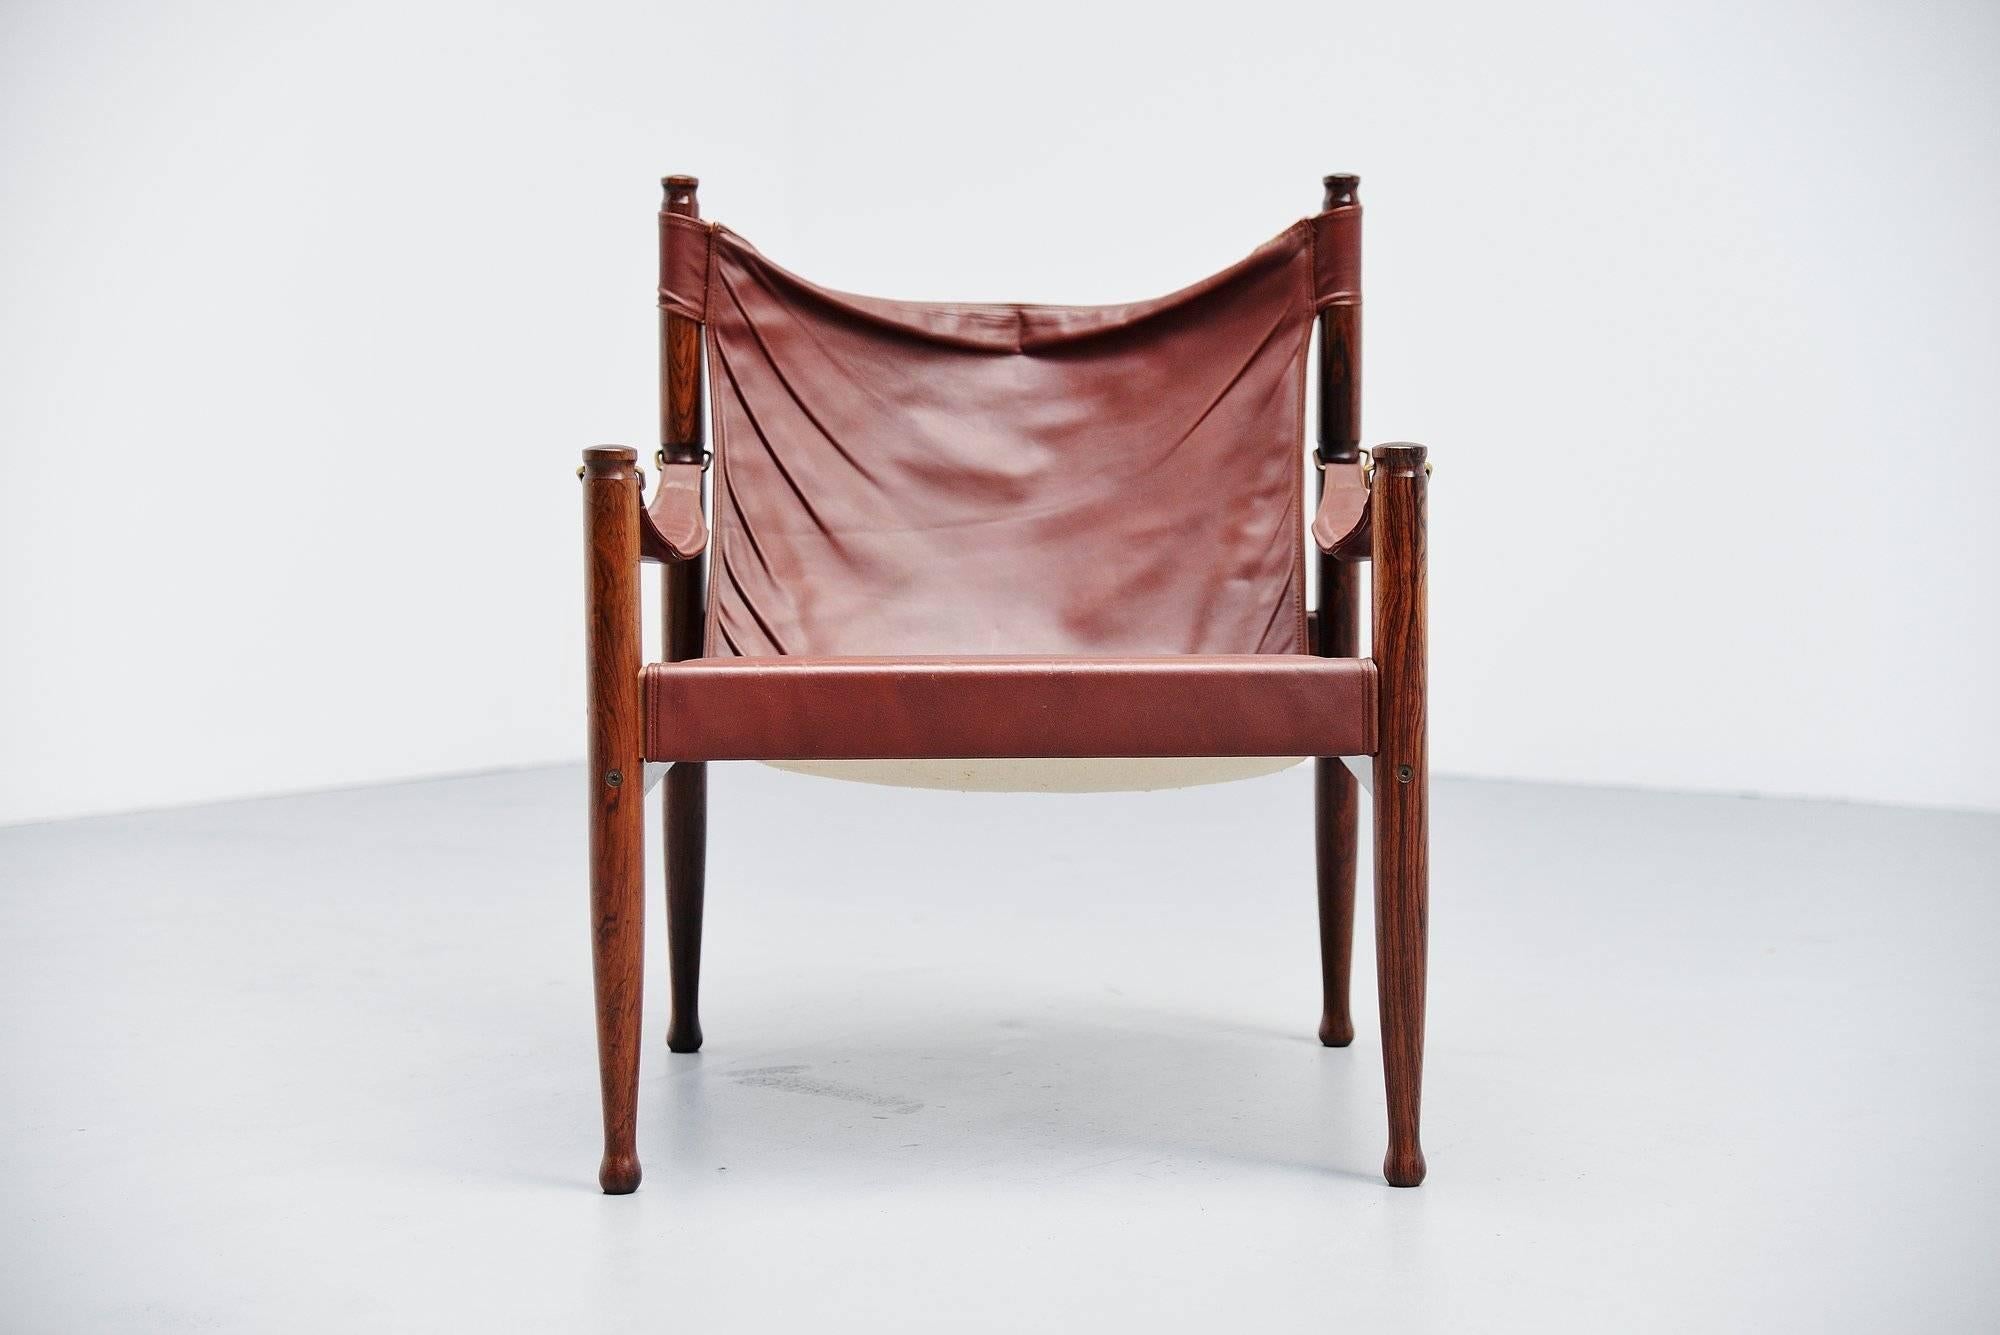 Stunning safari lounge chair designed by Erik Worts and manufactured by Niels Eilersen, Denmark, 1960. The design was based on a traditional English chair used by hunters in Africa and and Asia. Made of solid rosewood and reddish leather seat with